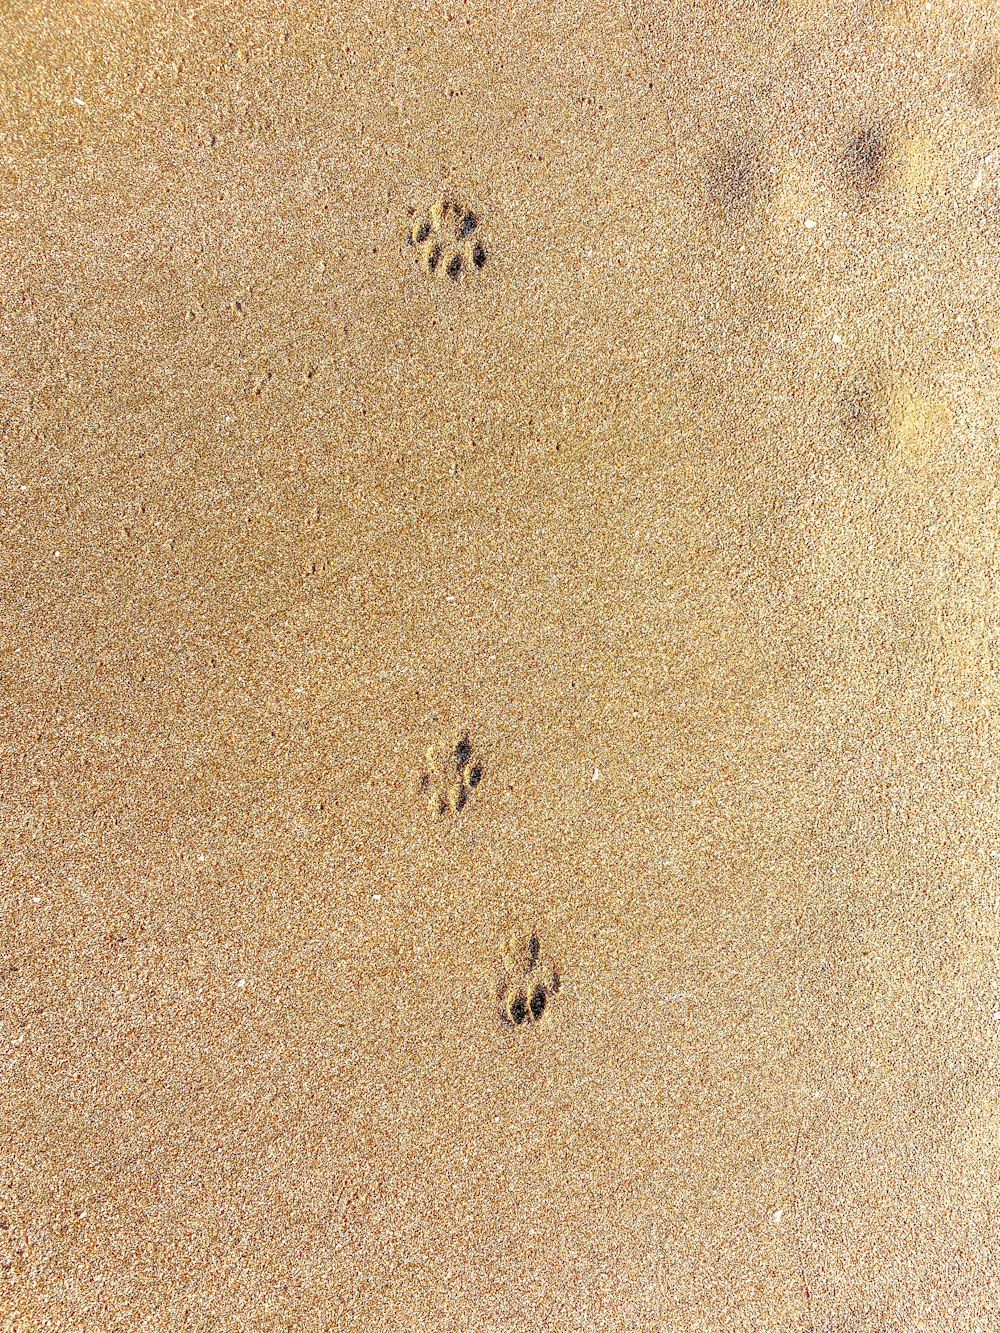 a group of people walking on a beach